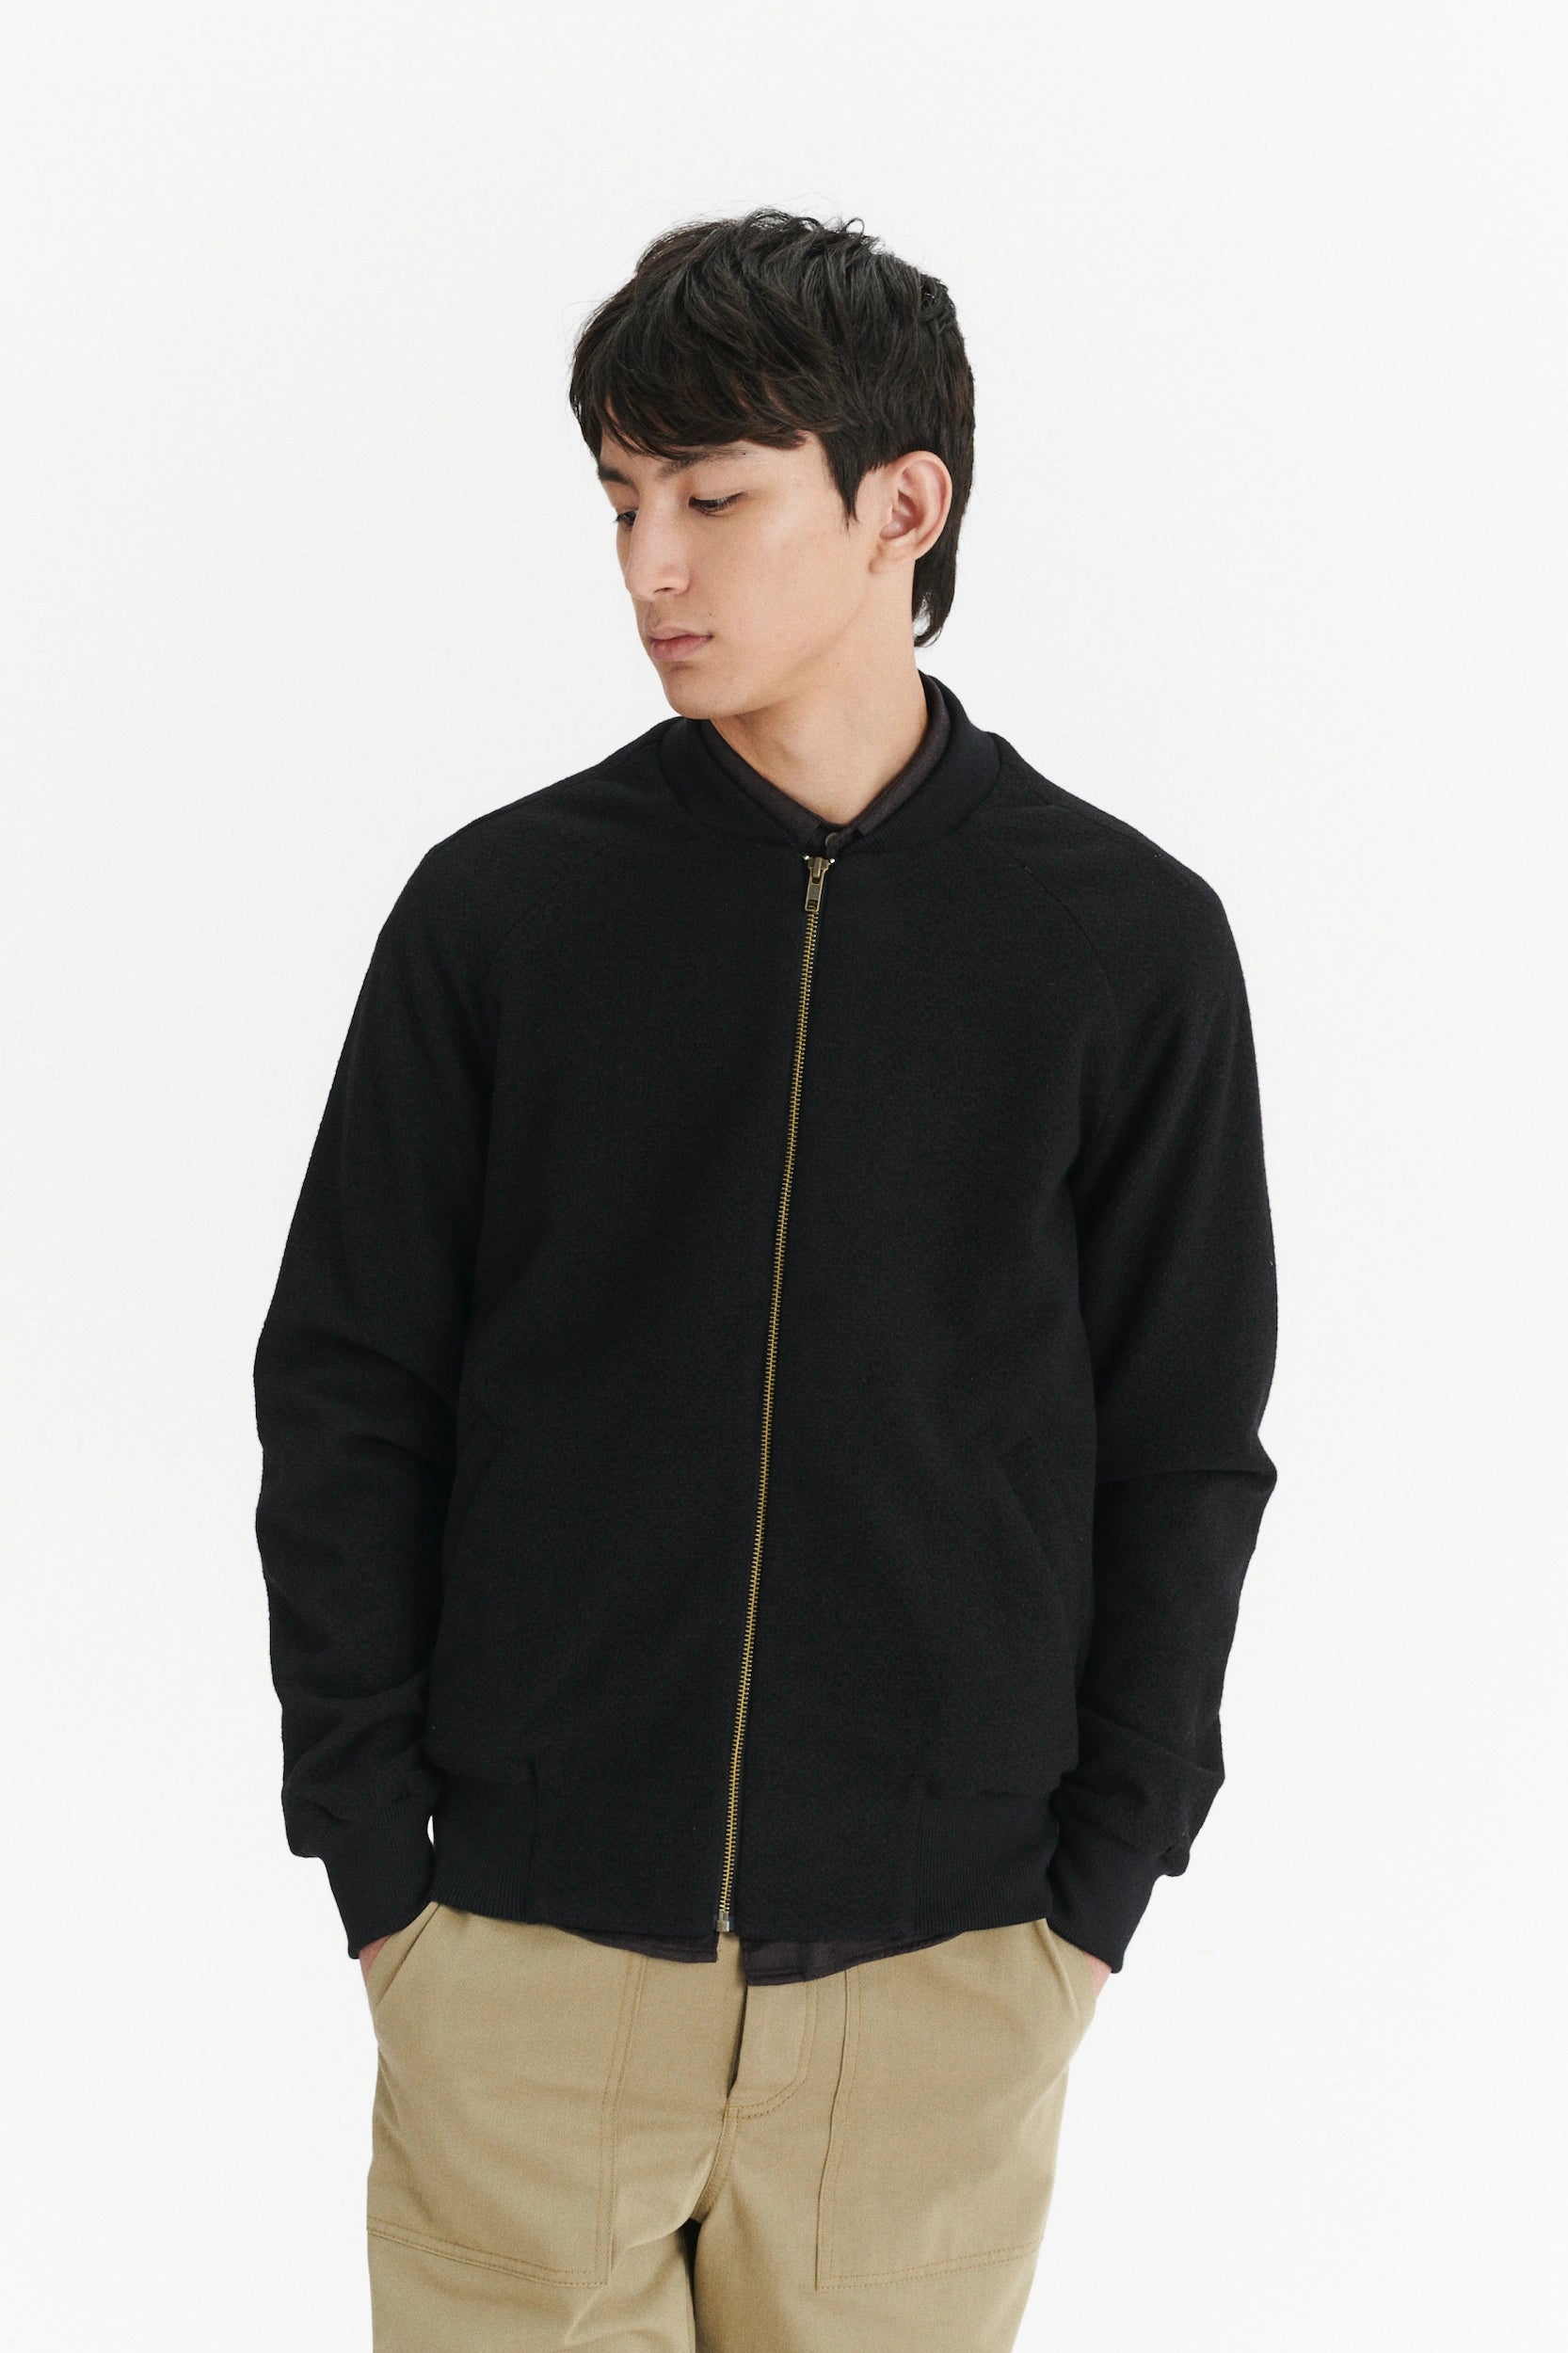 Bomber Jacket in a Black Italian Winter Virgin Wool and Cotton 